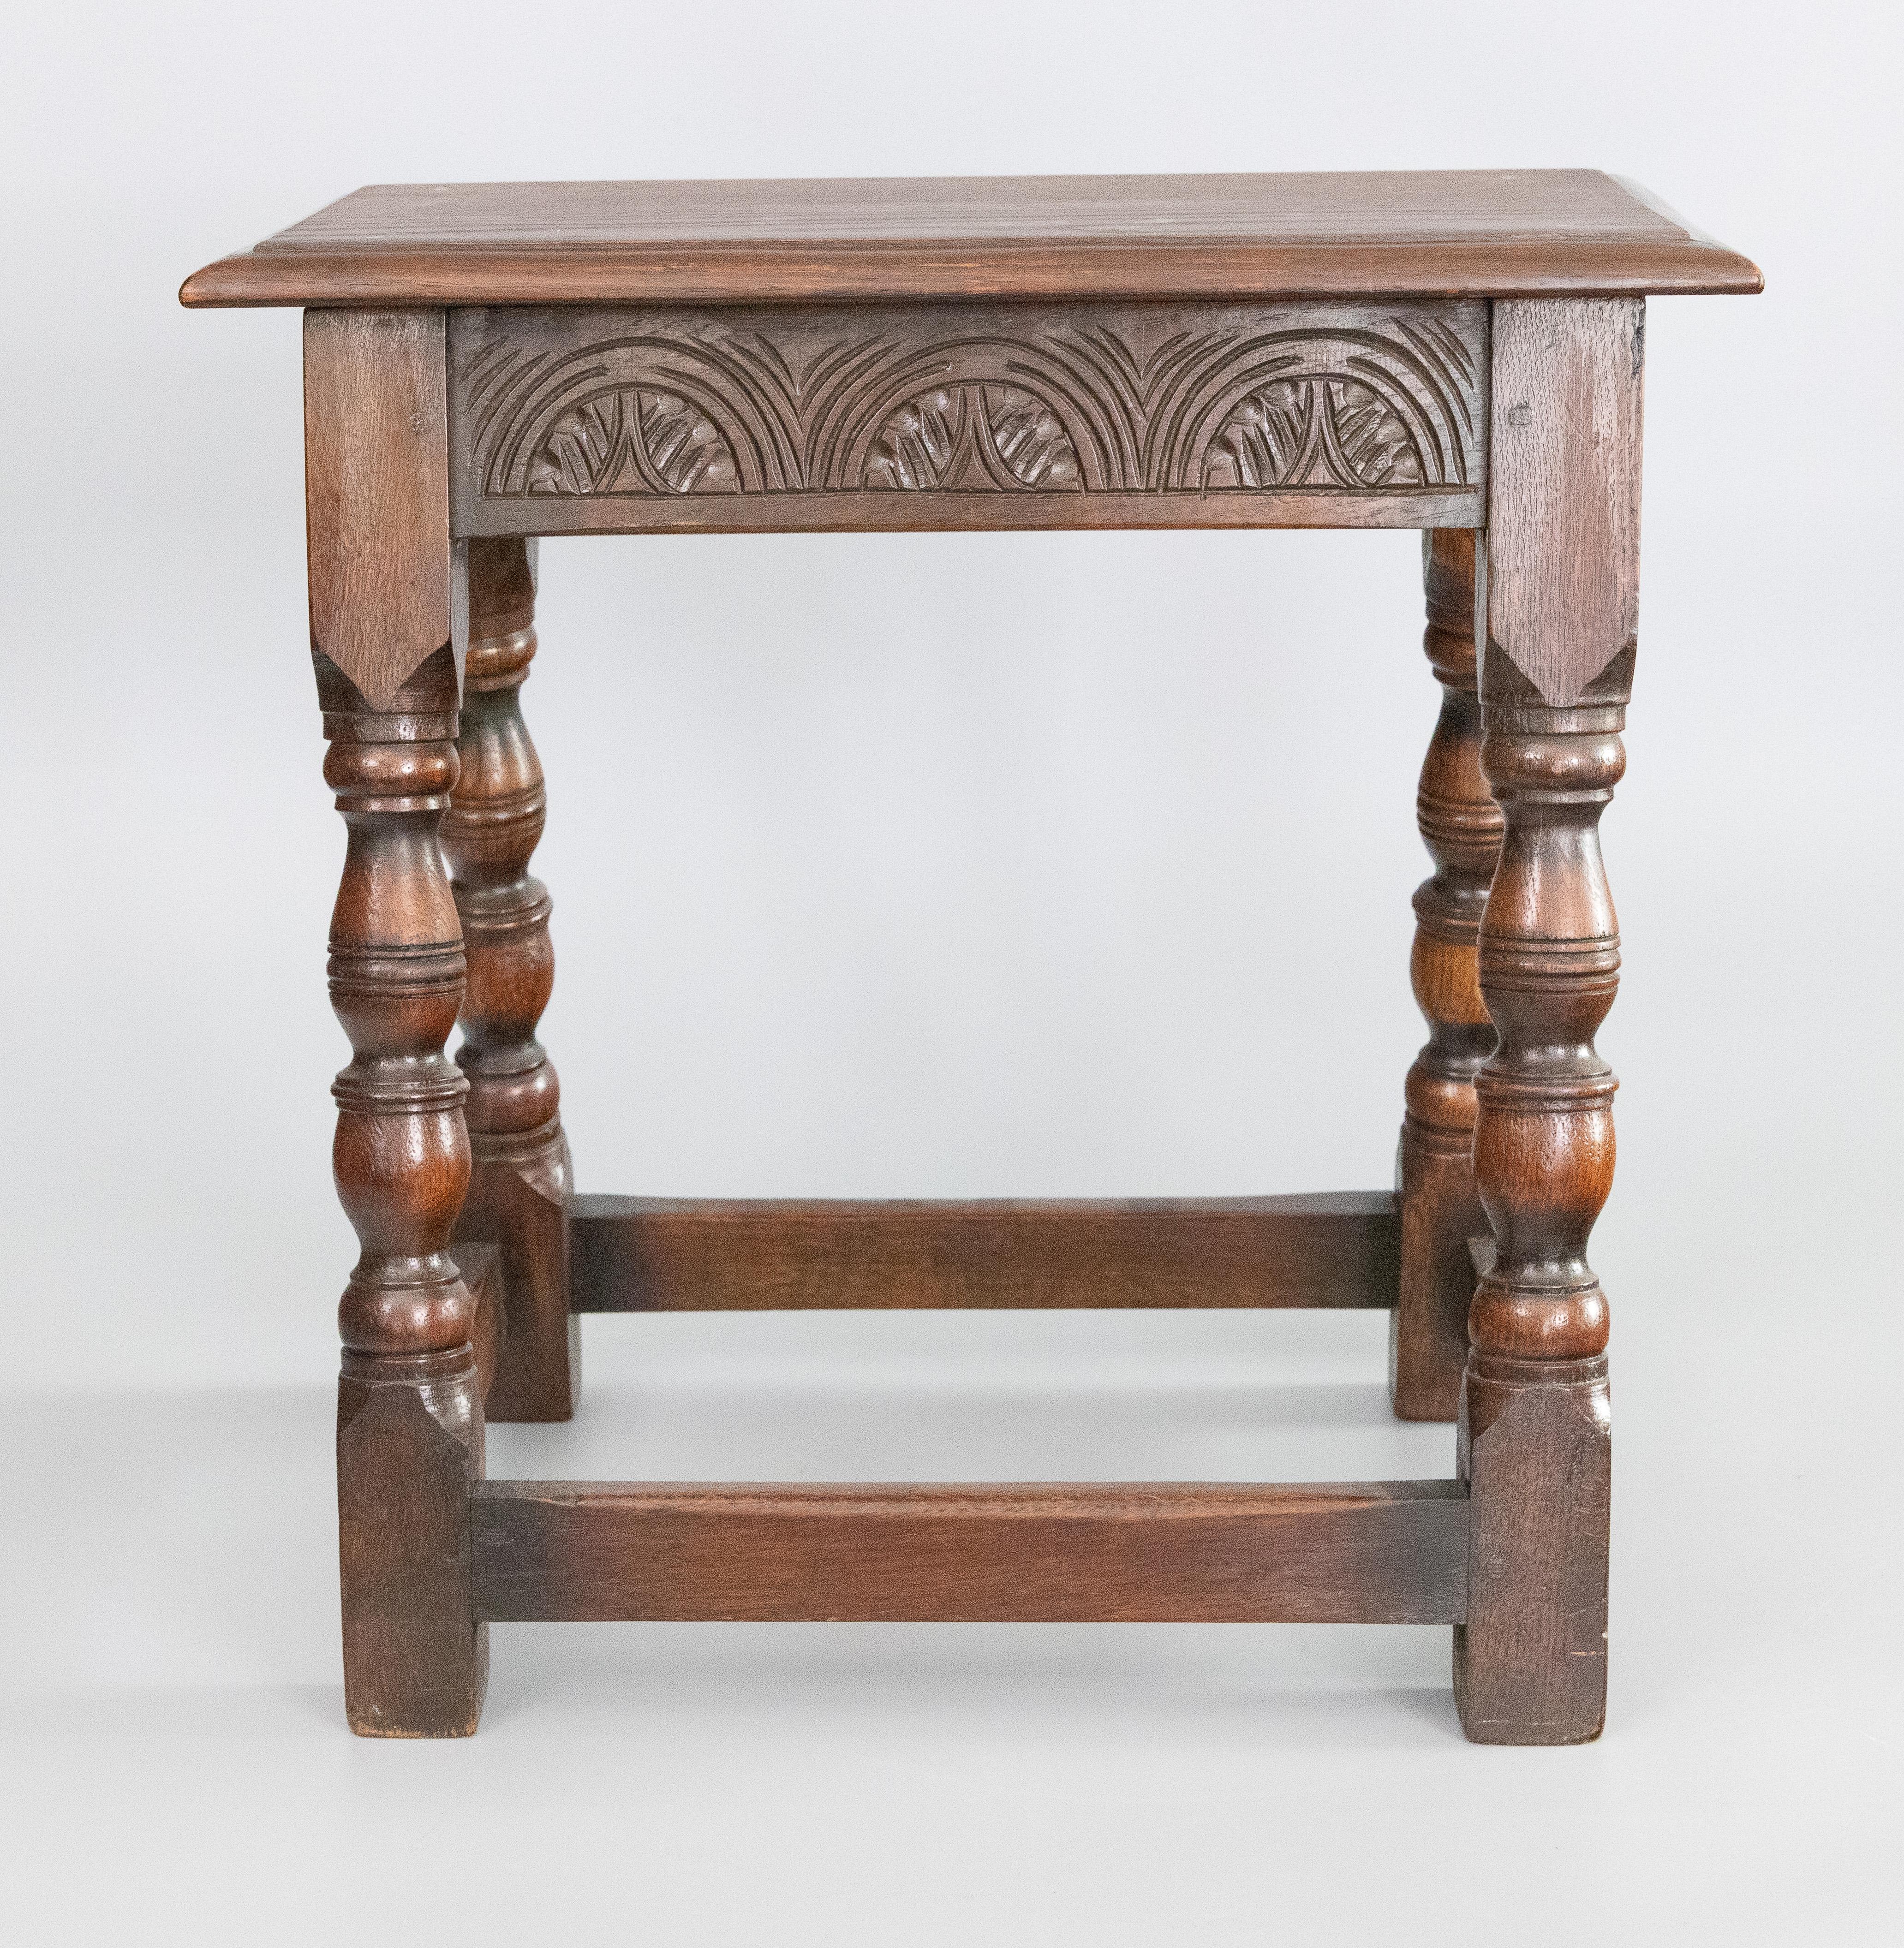 19th Century English Carved Oak Pegged Joint Stool Side Table In Good Condition For Sale In Pearland, TX